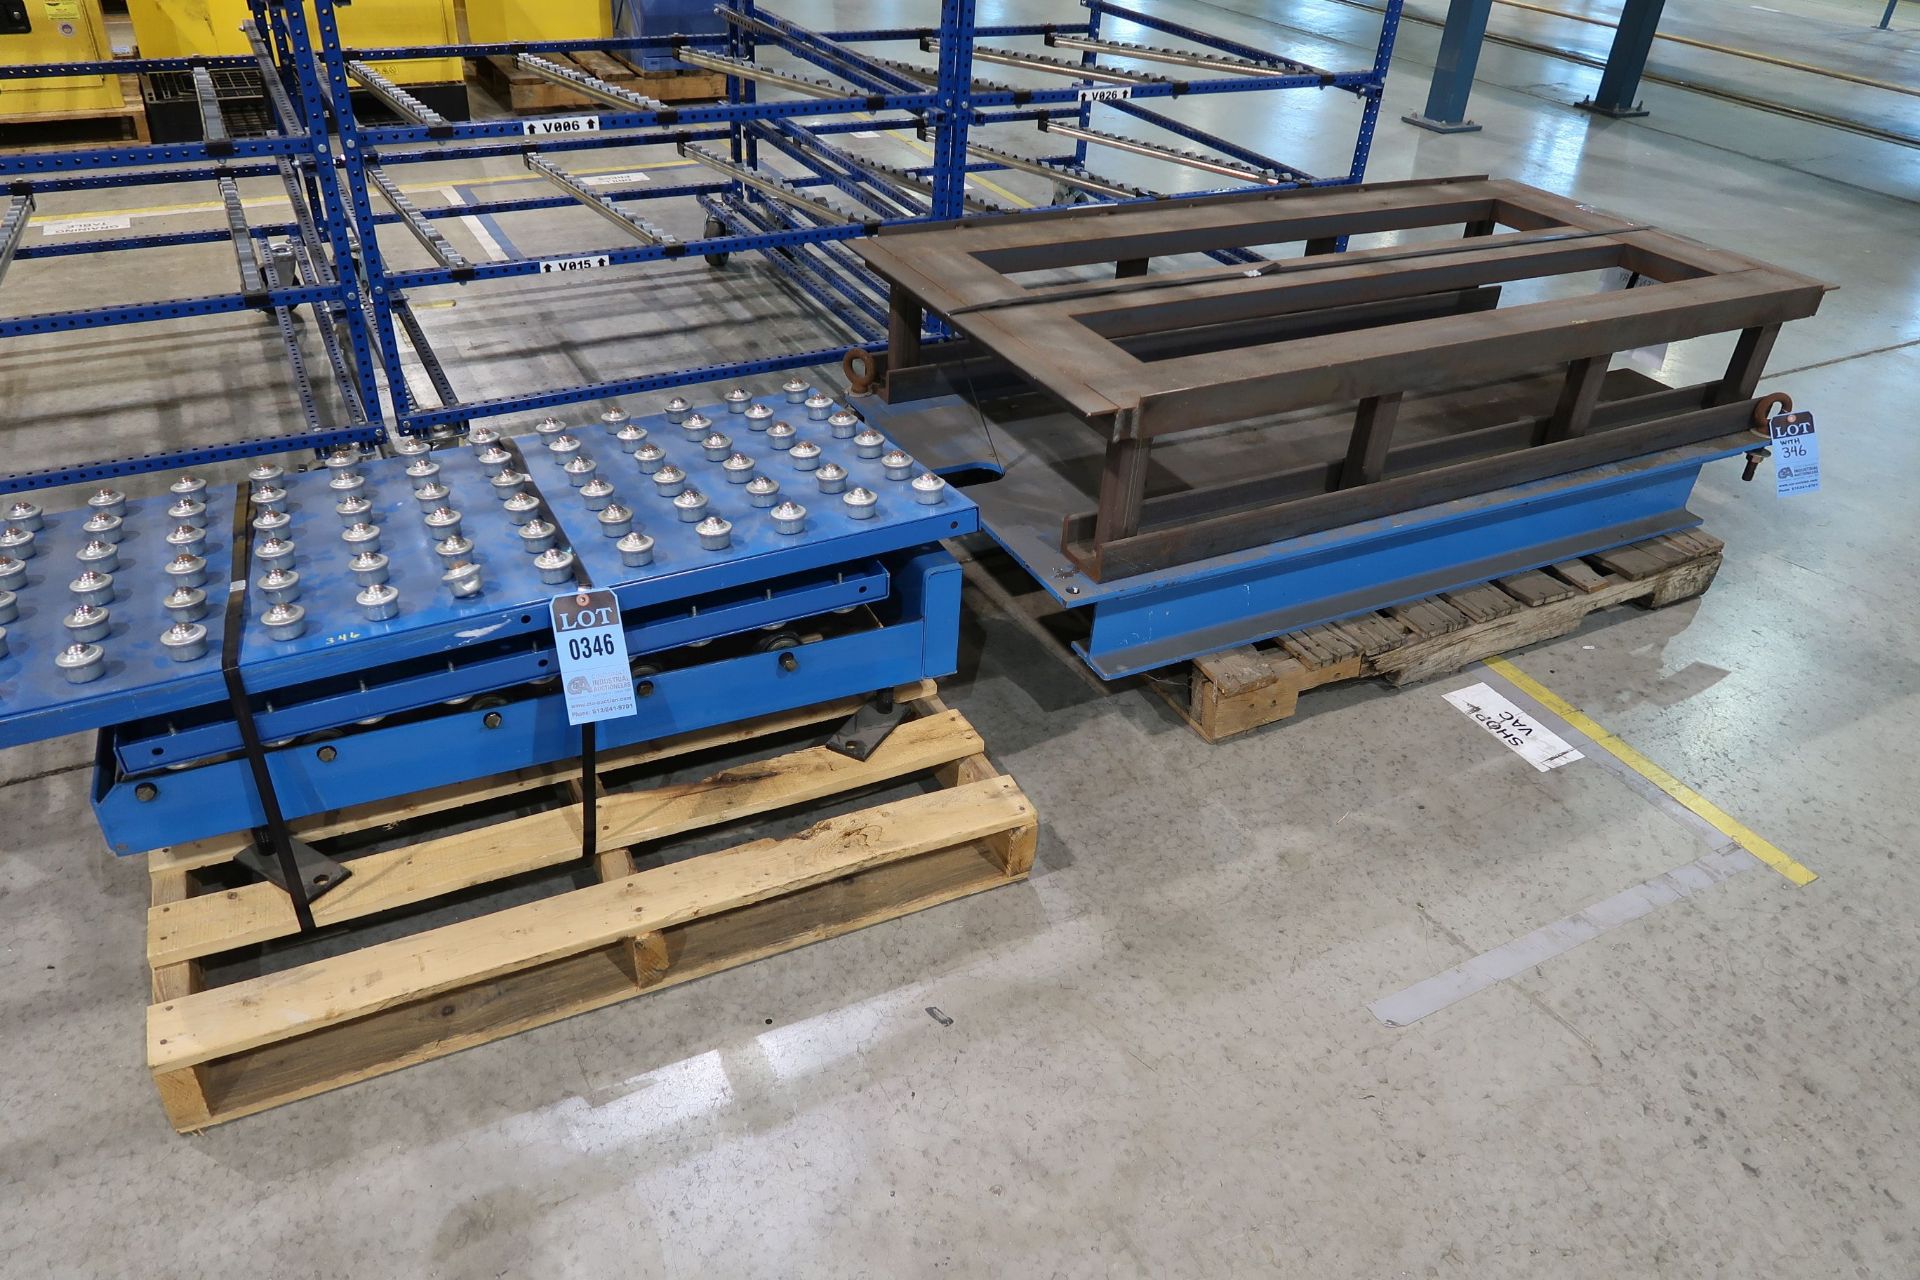 PIECES 24" X 36"/48" AND (1) PIECE 28" X 40" ROLLER CONVEYOR WITH HEAVY DUTY STEEL STAND